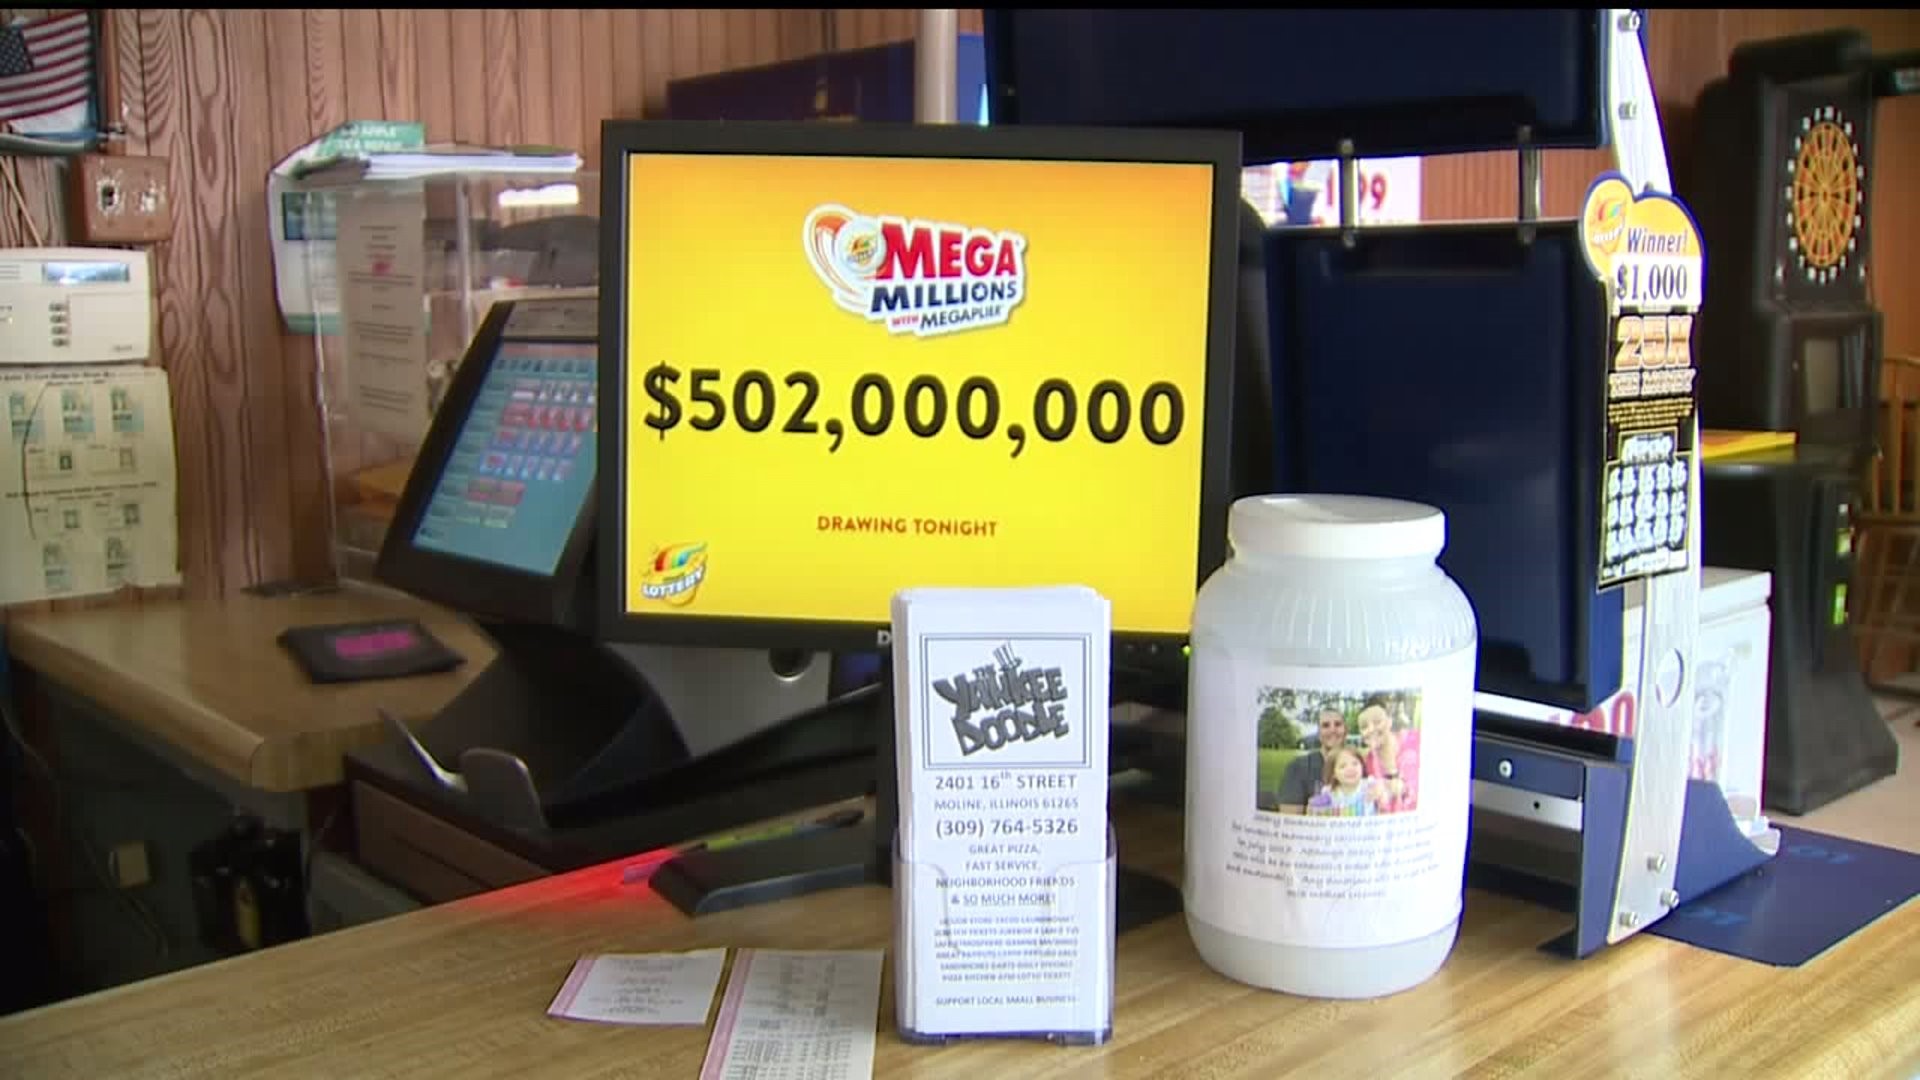 Mega Millions Jackpot drawing is March 30